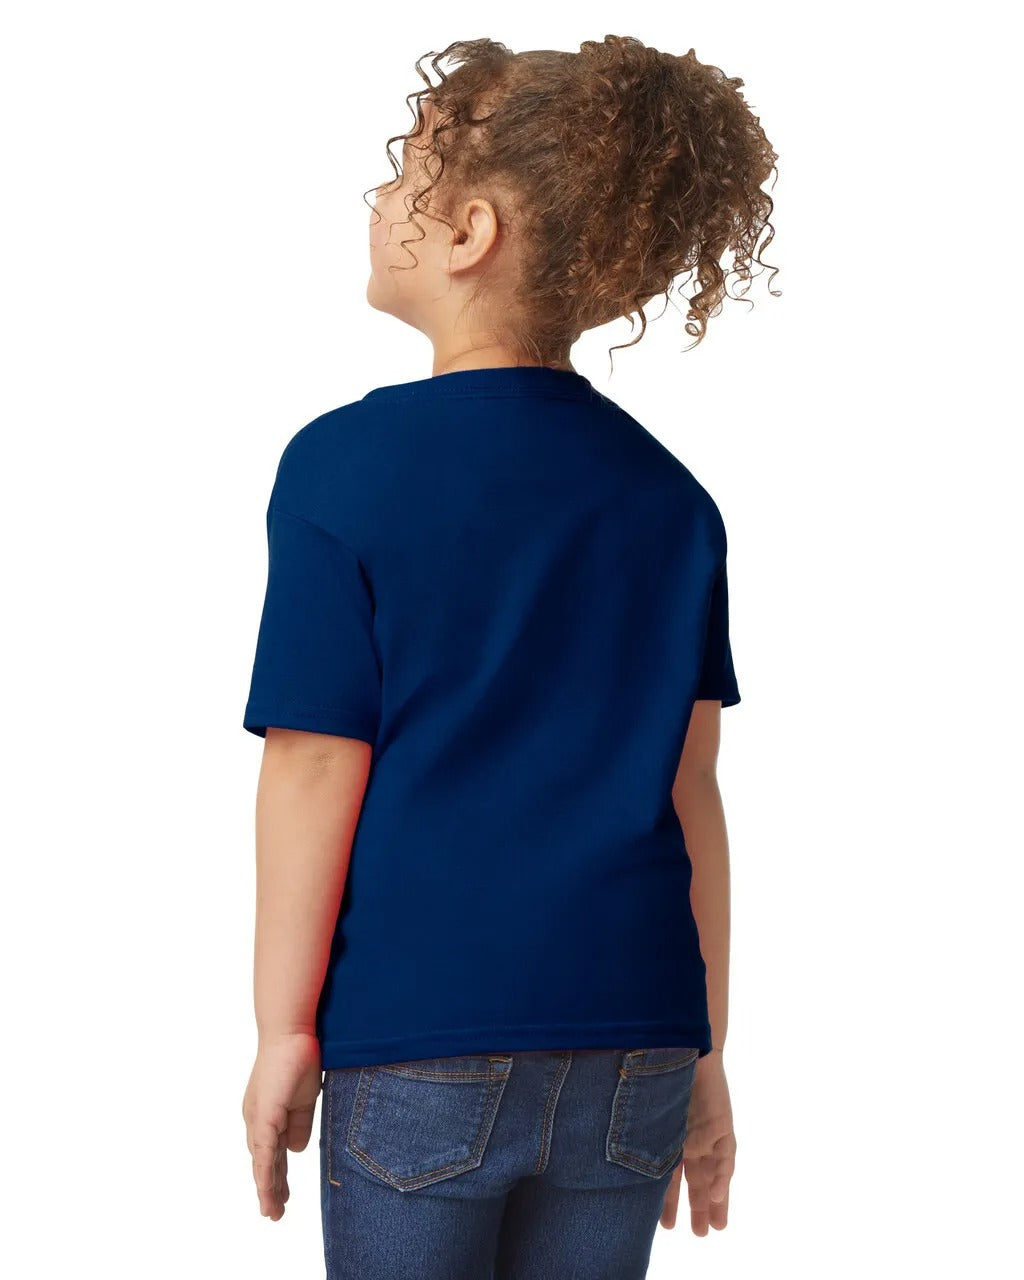 Toddlers Tshirt - Navy